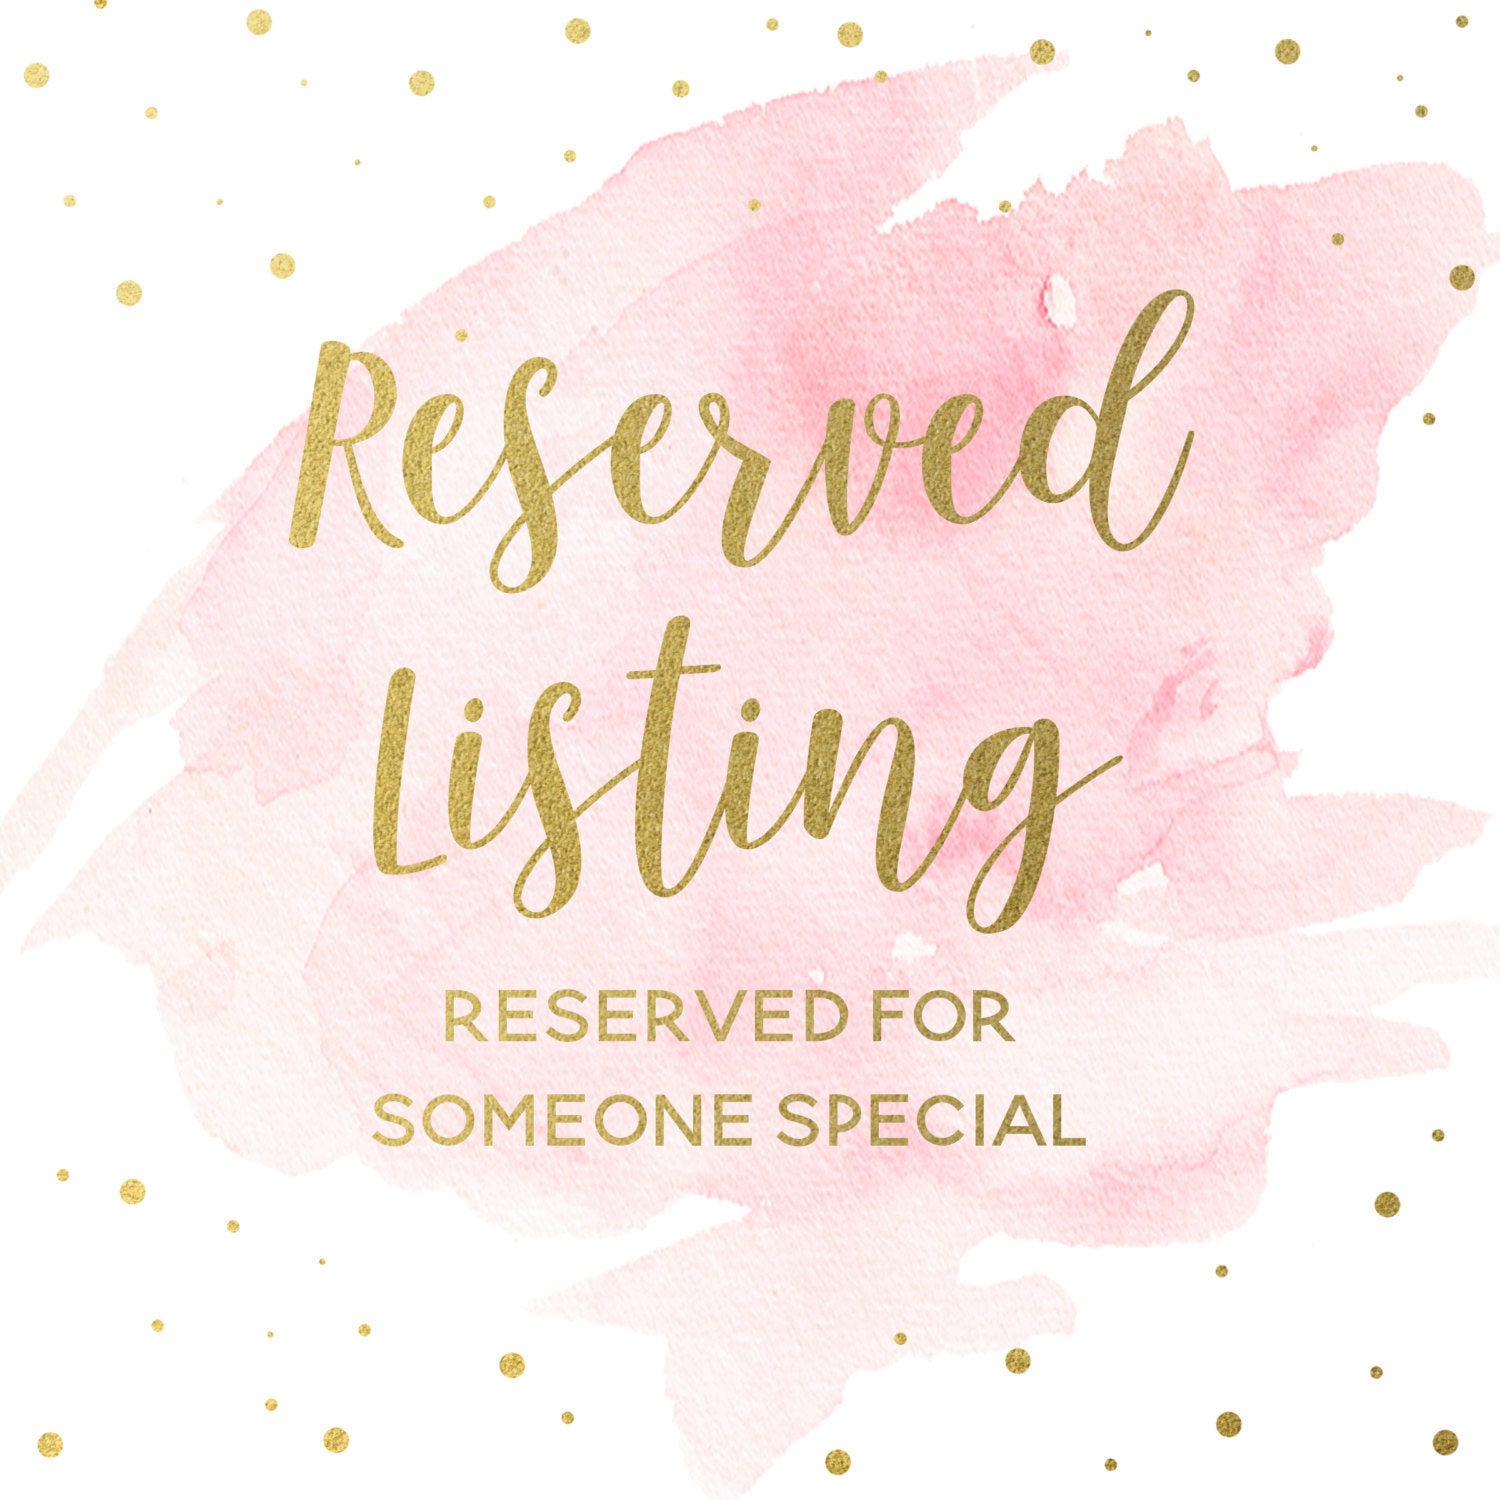 Reserved Listing - Christie G.